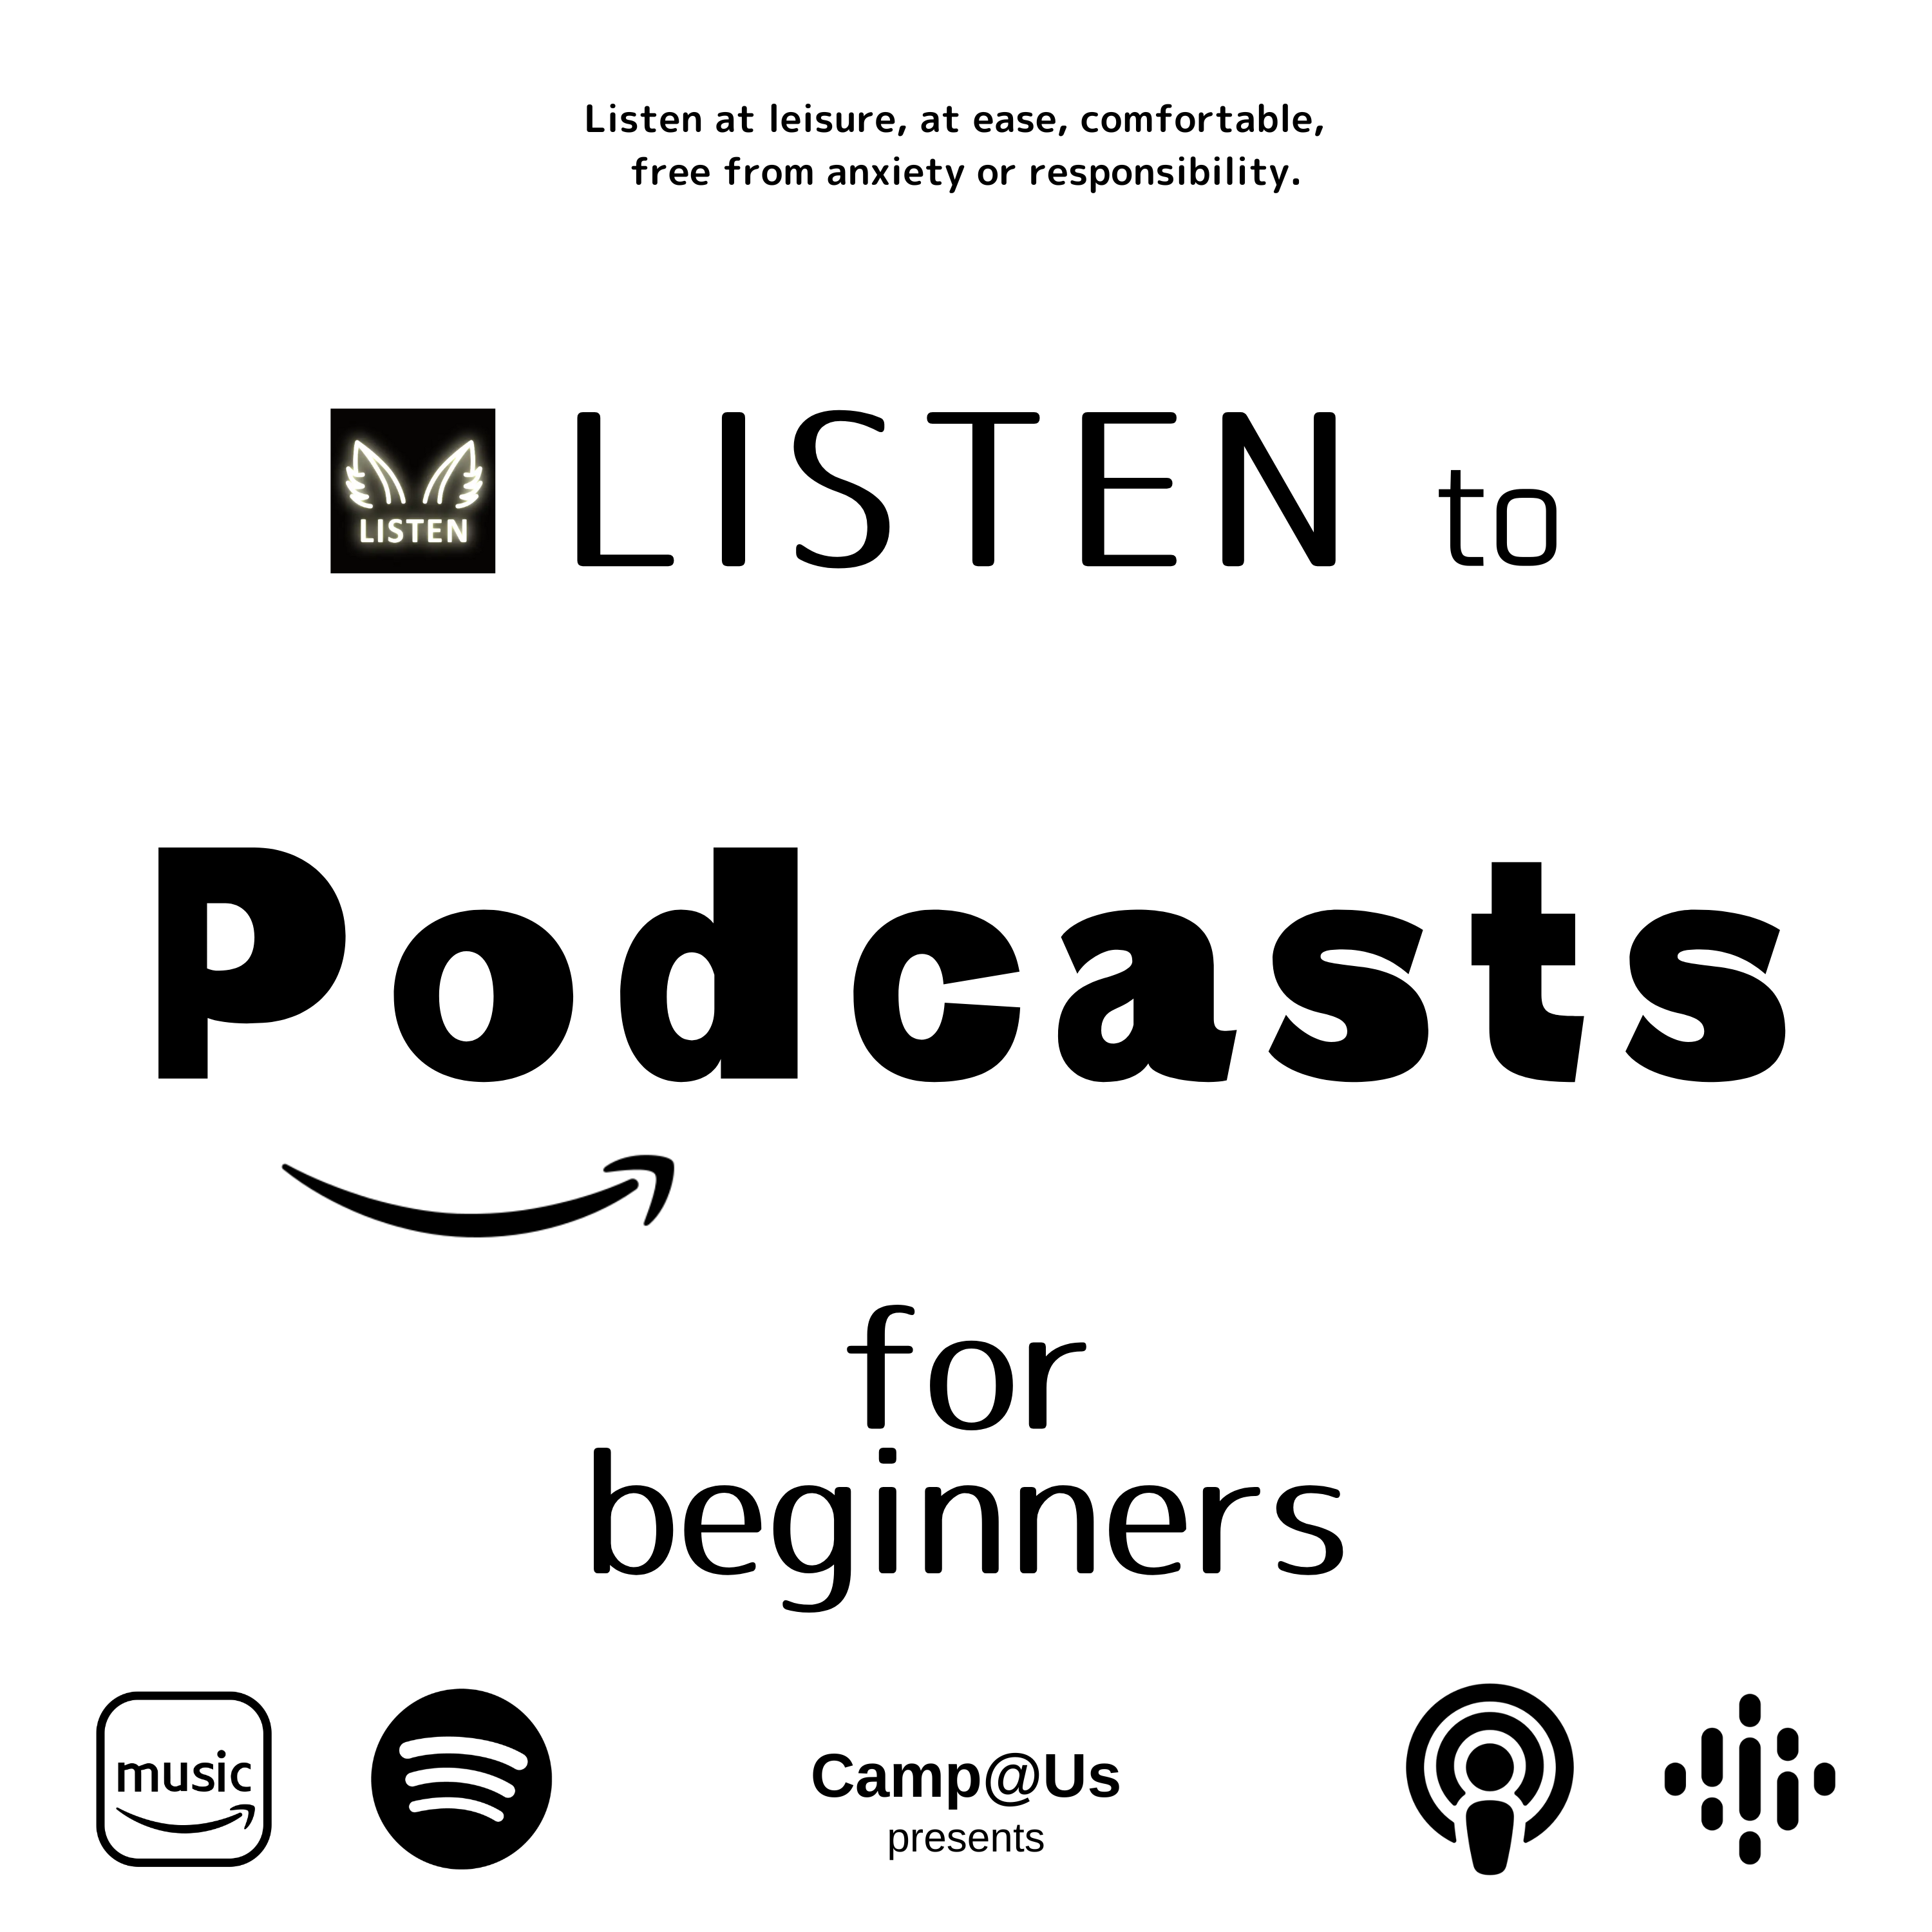 #2 LISTEN to Podcasts! for Beginners /presented by はじめるradioキャンパス